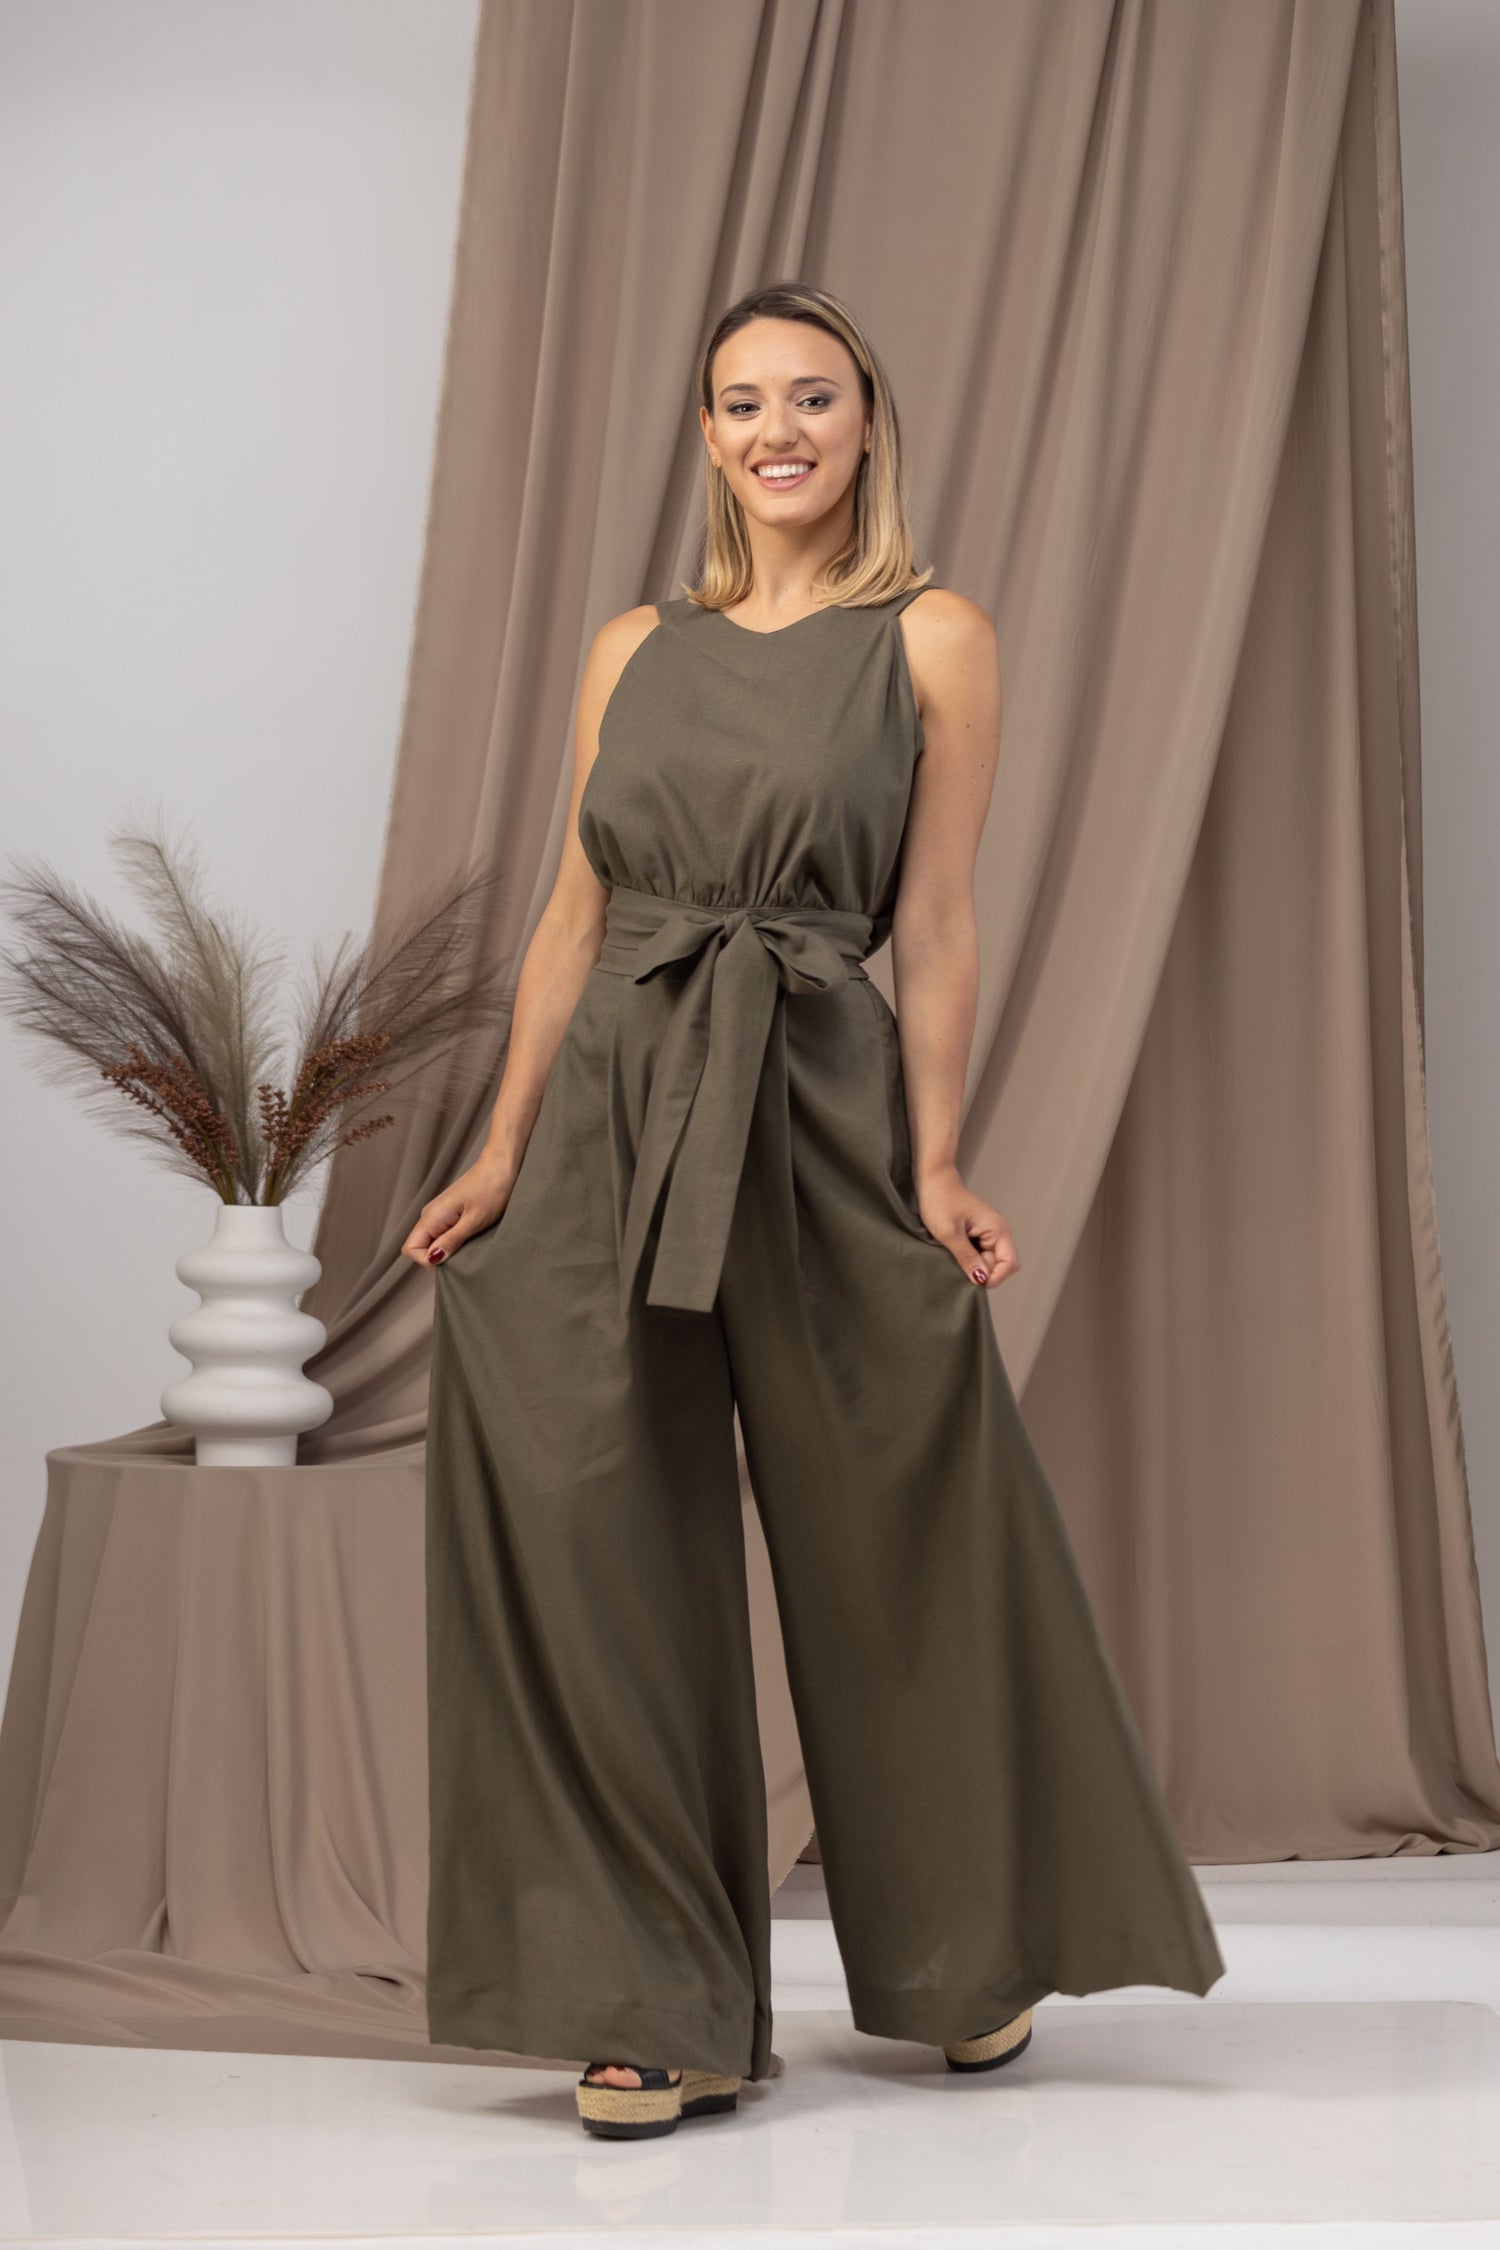 Breathable and Soft Linen Jumpsuit from Nikka Place | Effortless fashion for easy living